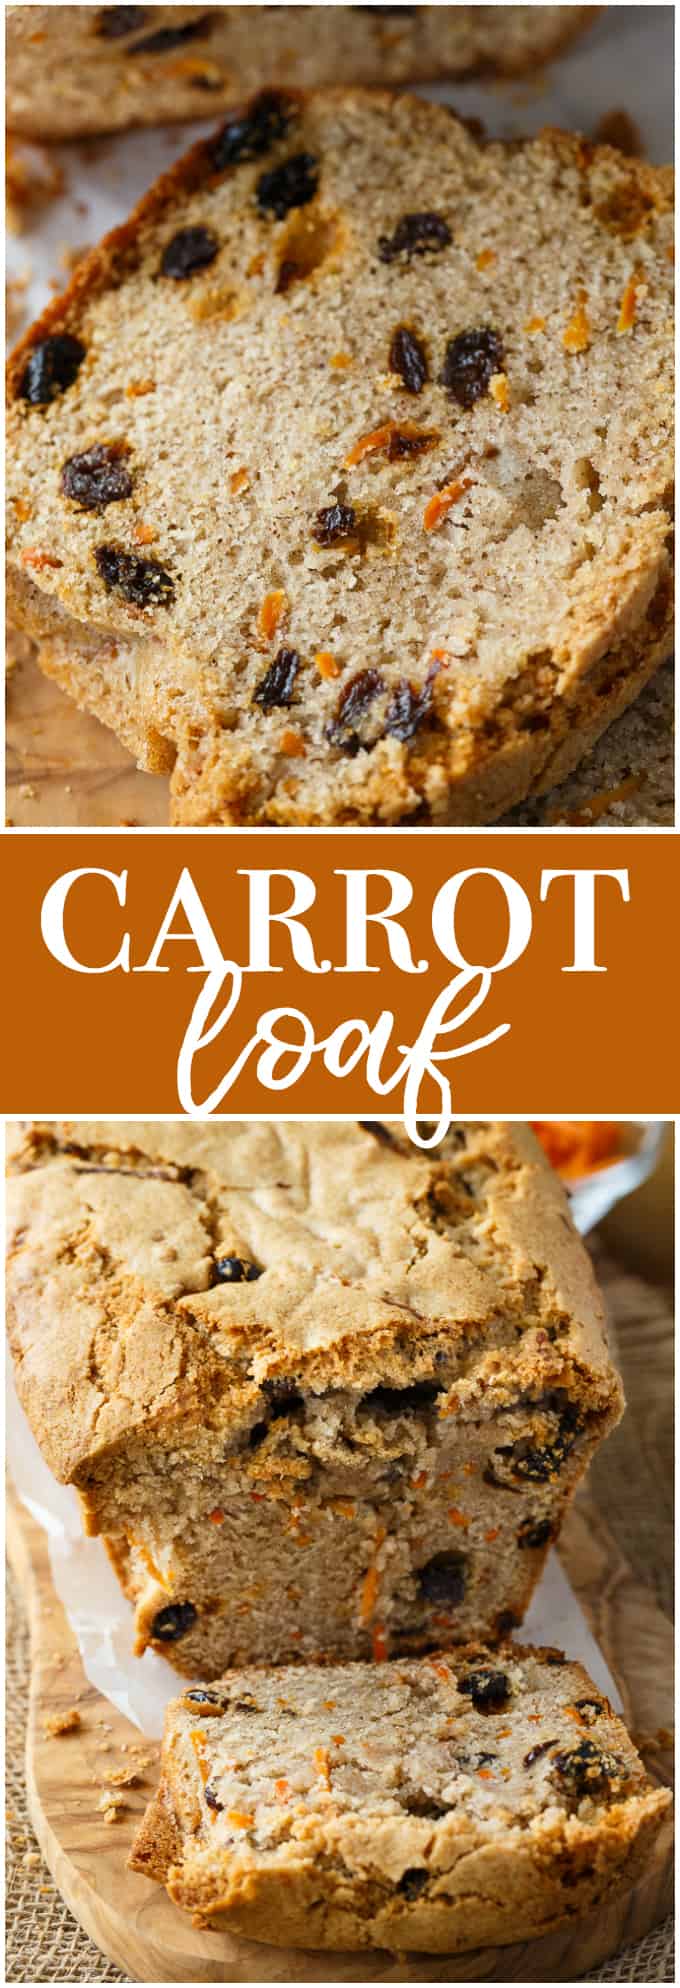 Carrot Loaf - A deliciously spicy fall bread! Loaded with carrots, raisins and a hint of sweetness.